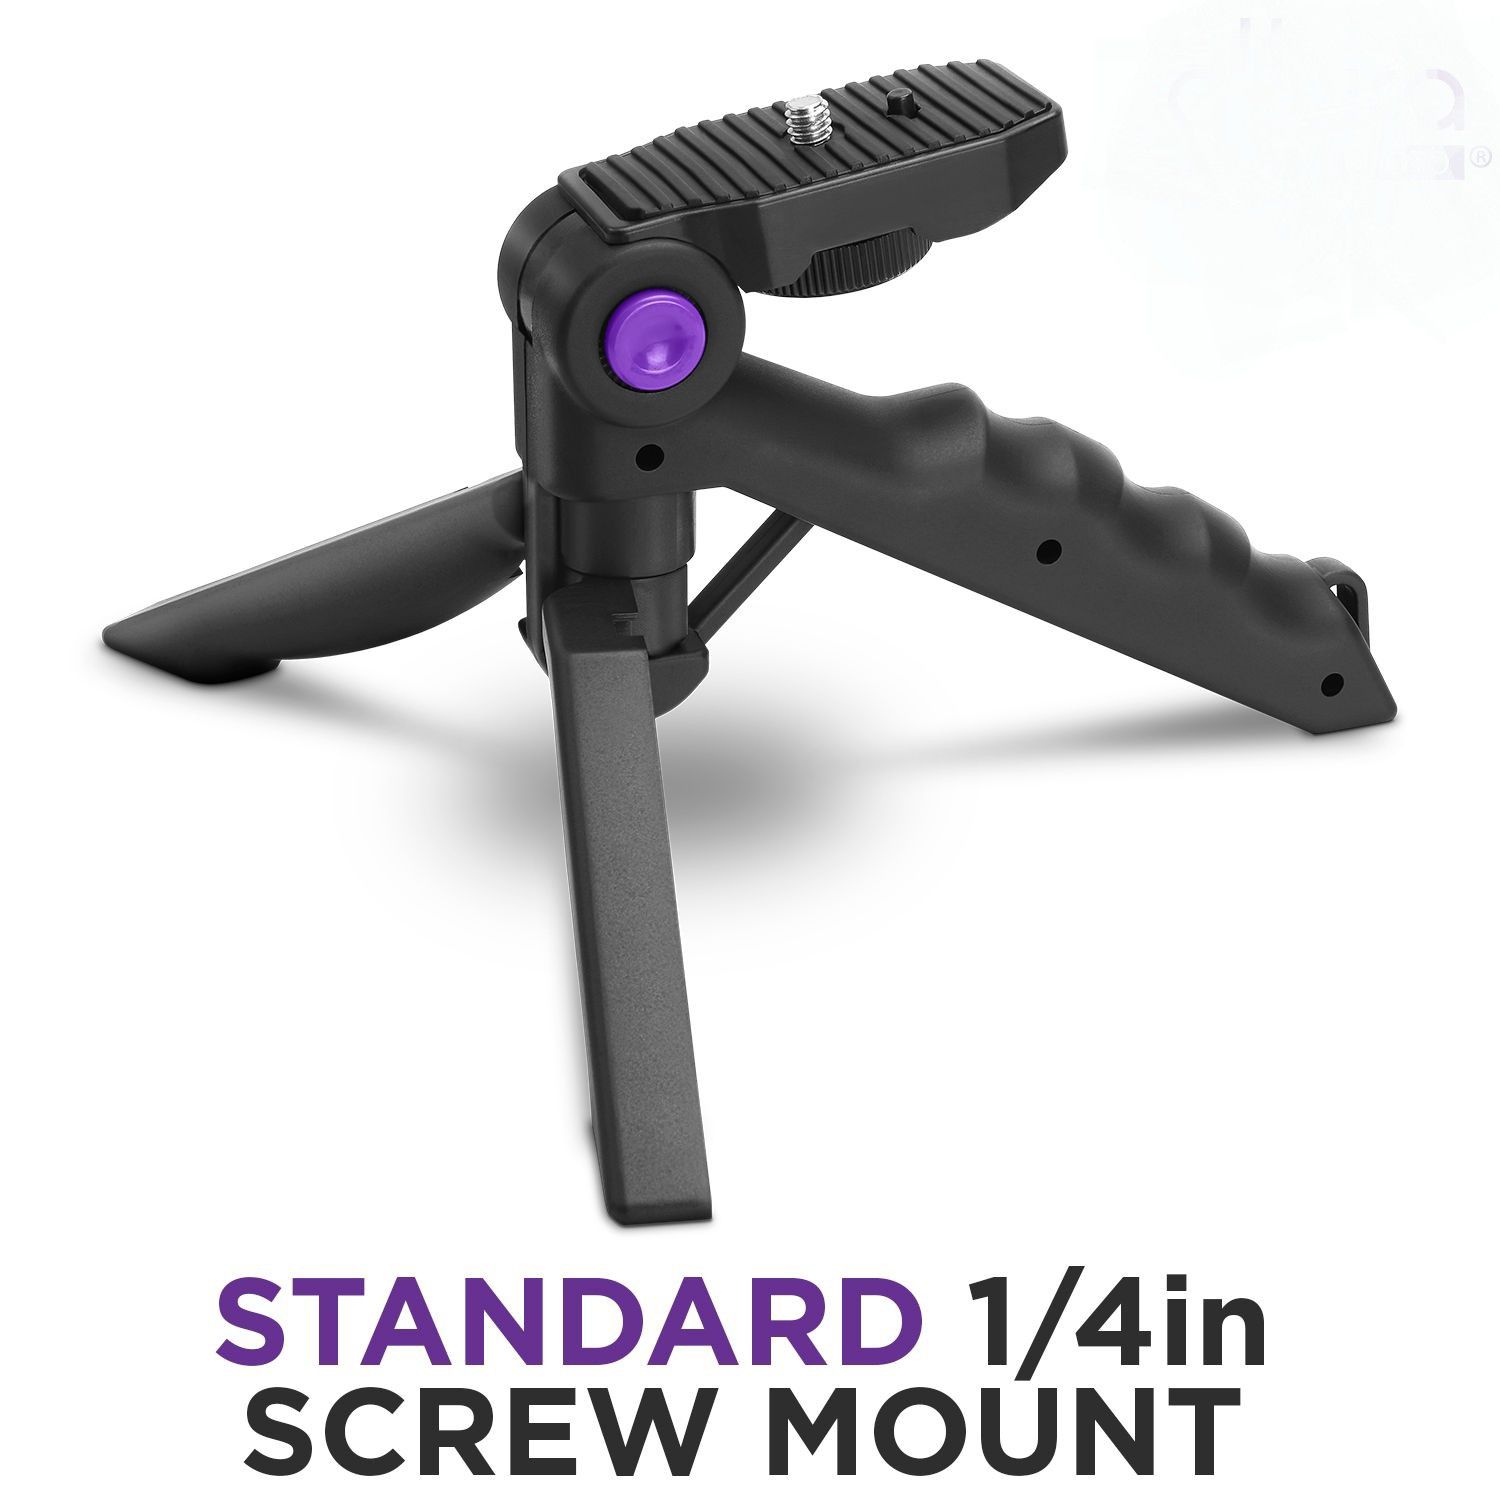 Mini Tripod Tabletop Stand w/ Soft Pistol Grip for DSLR, Smartphones, Audio Recorder and Video Cameras